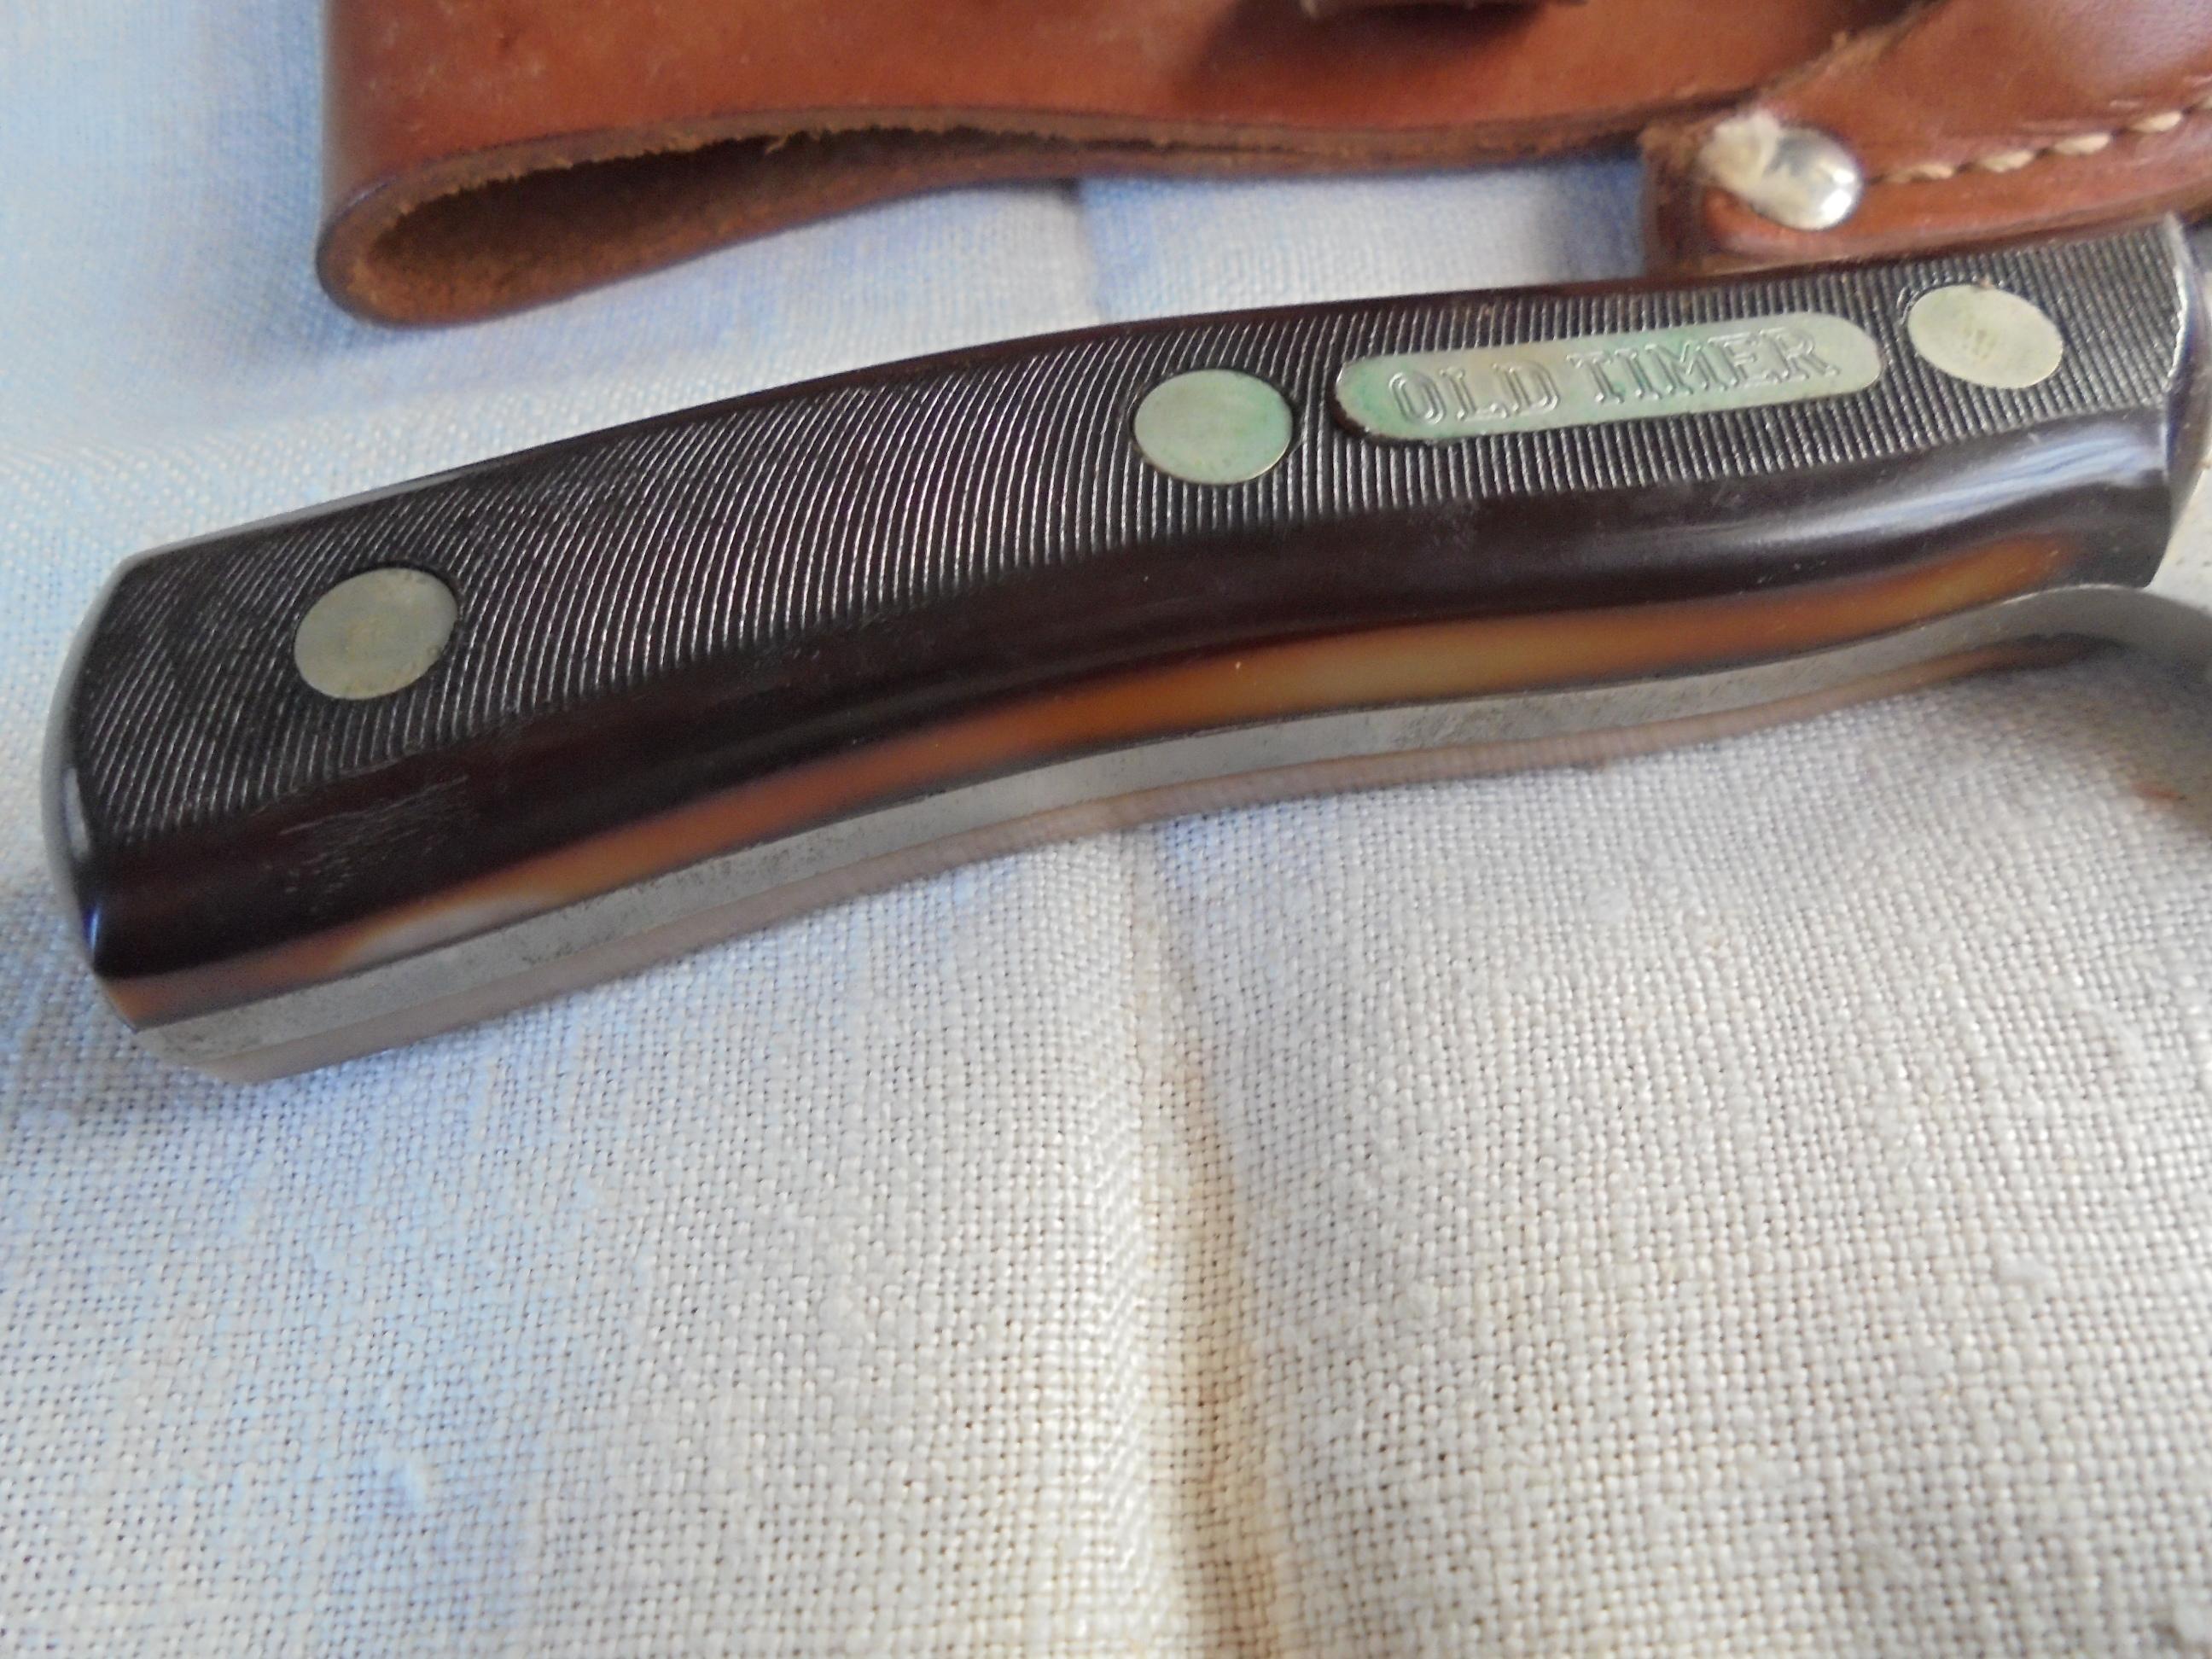 NOS "150T SCHRADE-WALDEN" FIXED BLADE KNIFE WITH LEATHER SHEATH-USA MADE